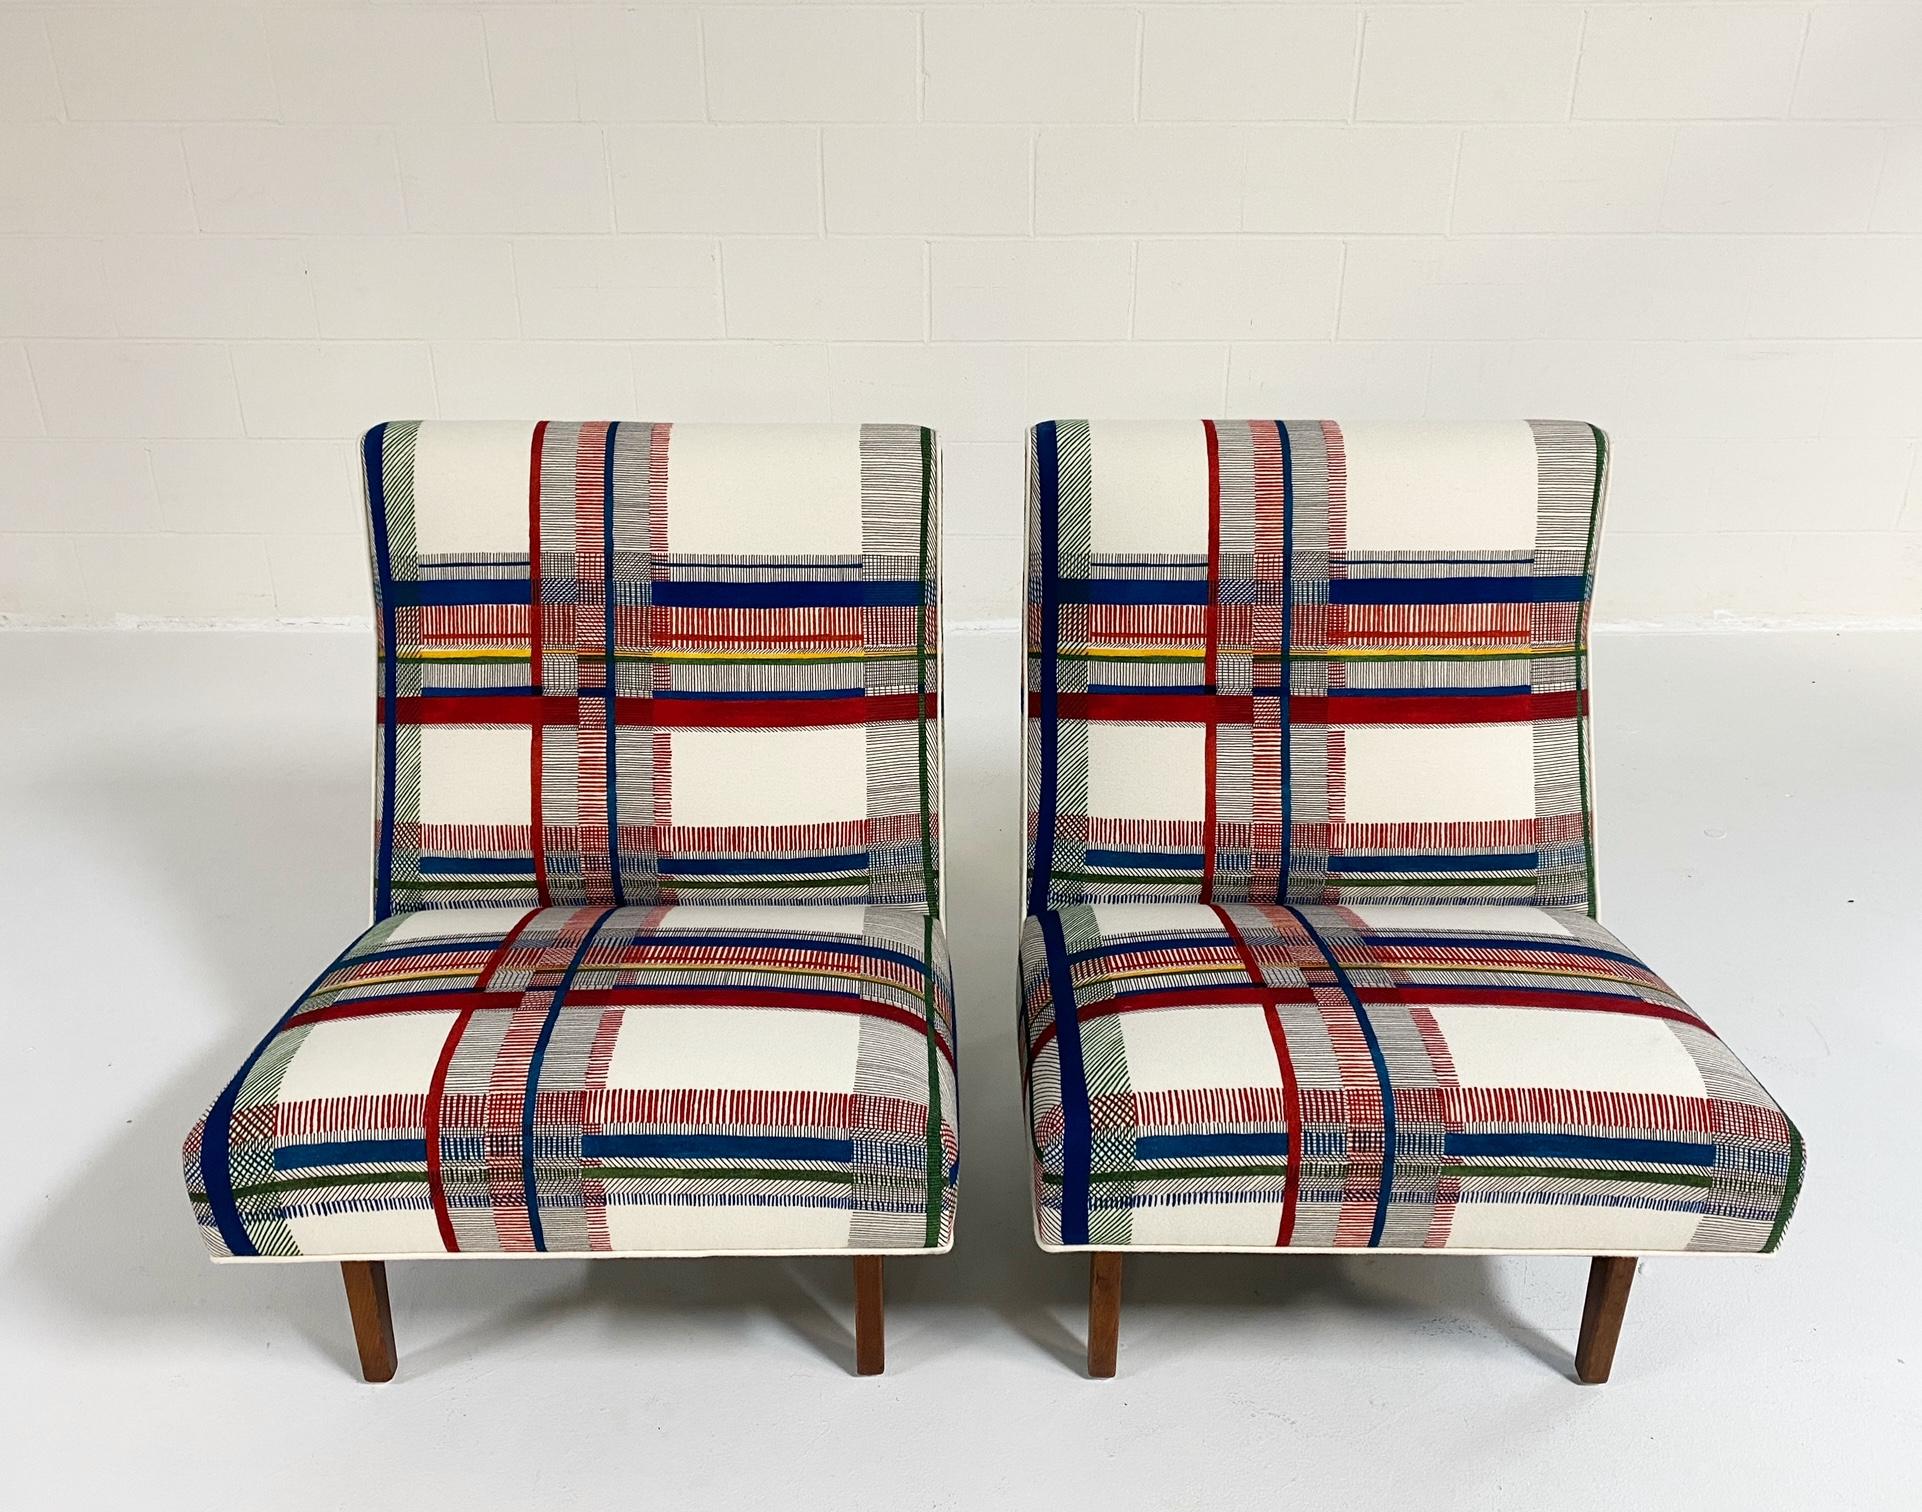 One of a Kind Vintage Jens Risom Slipper Chair in Hermès Wool, One Available 1